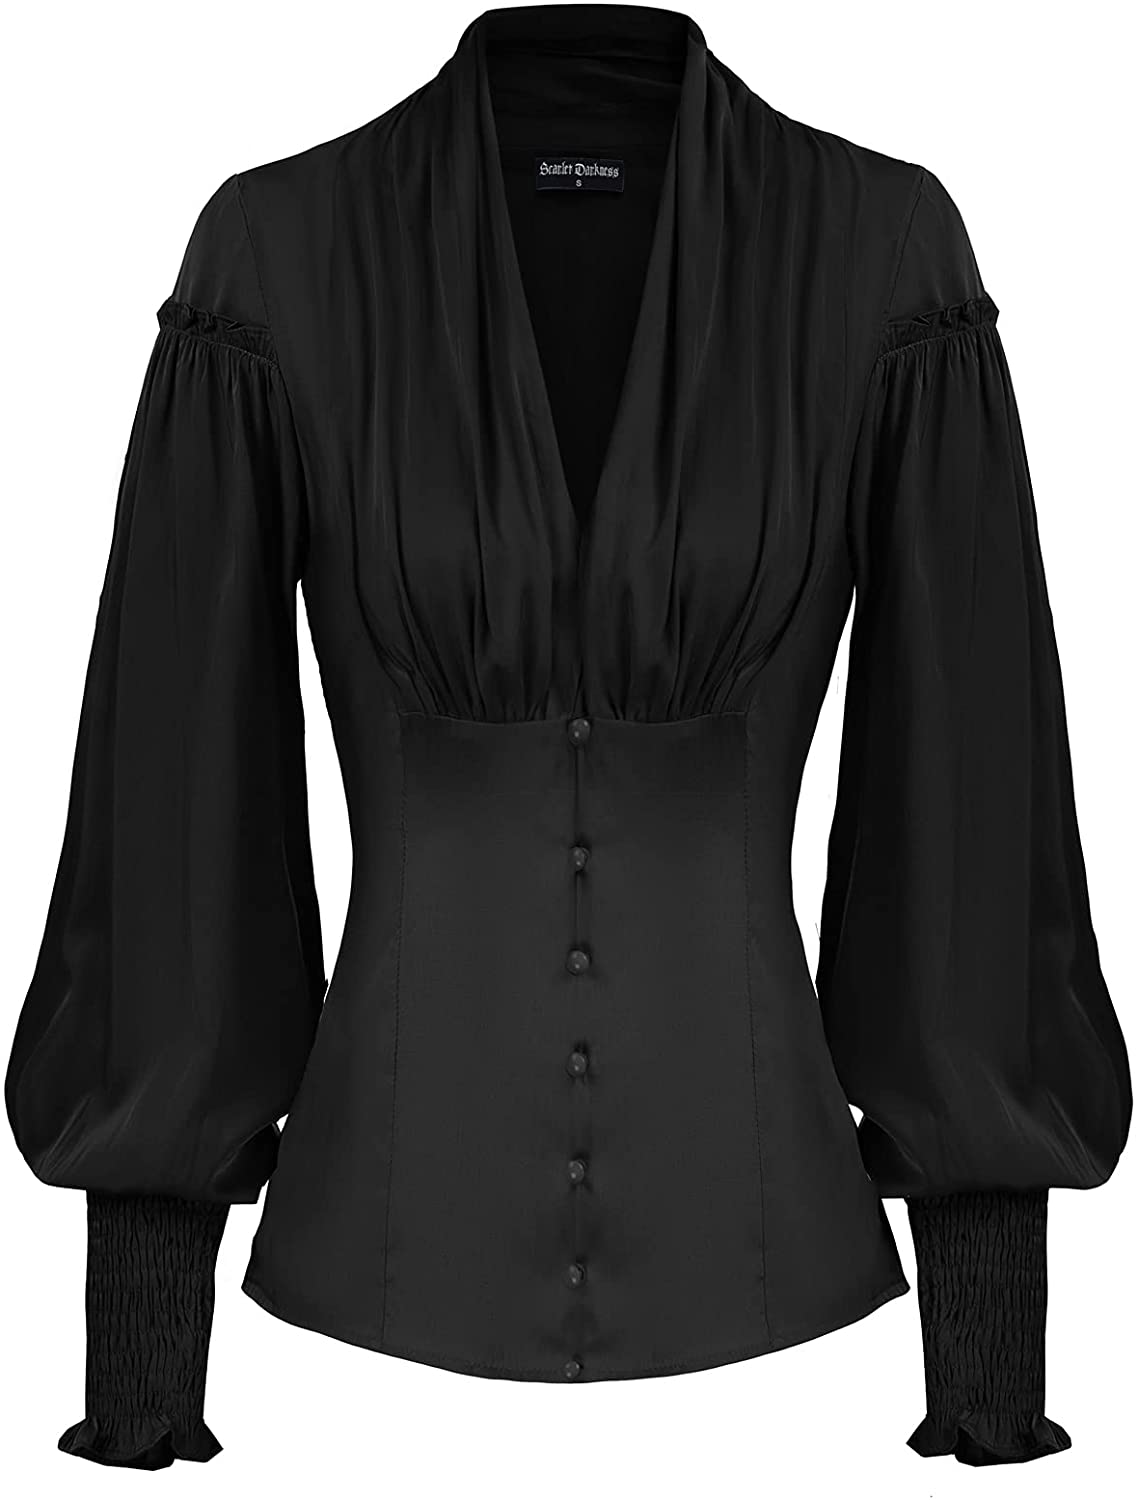 Scarlet Darkness Women Victorian Vintage Blouse Short Puff Sleeve Shirt with Bow Tie 